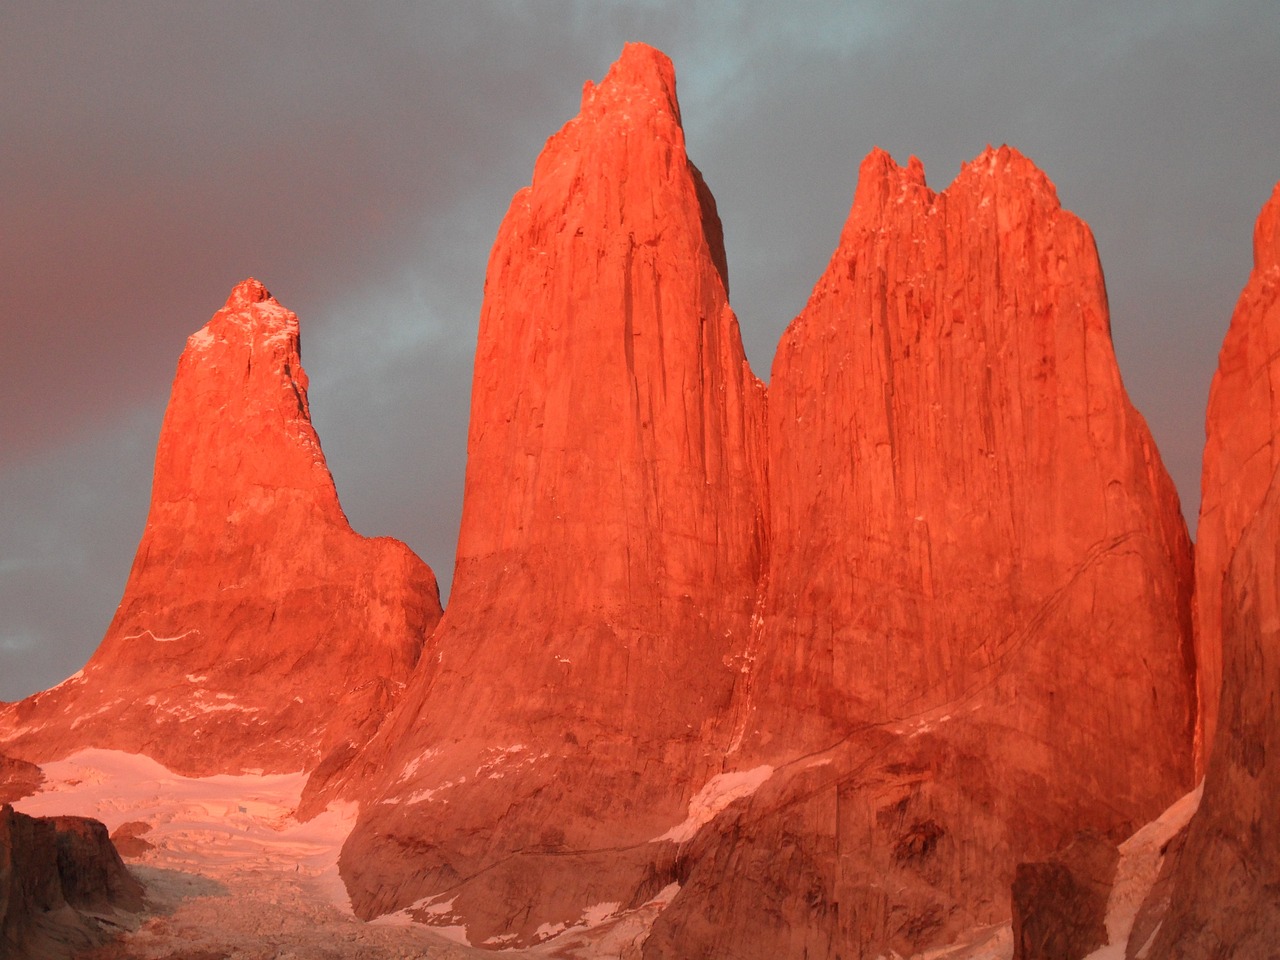 Ultimate Adventure and Romance in Torres del Paine